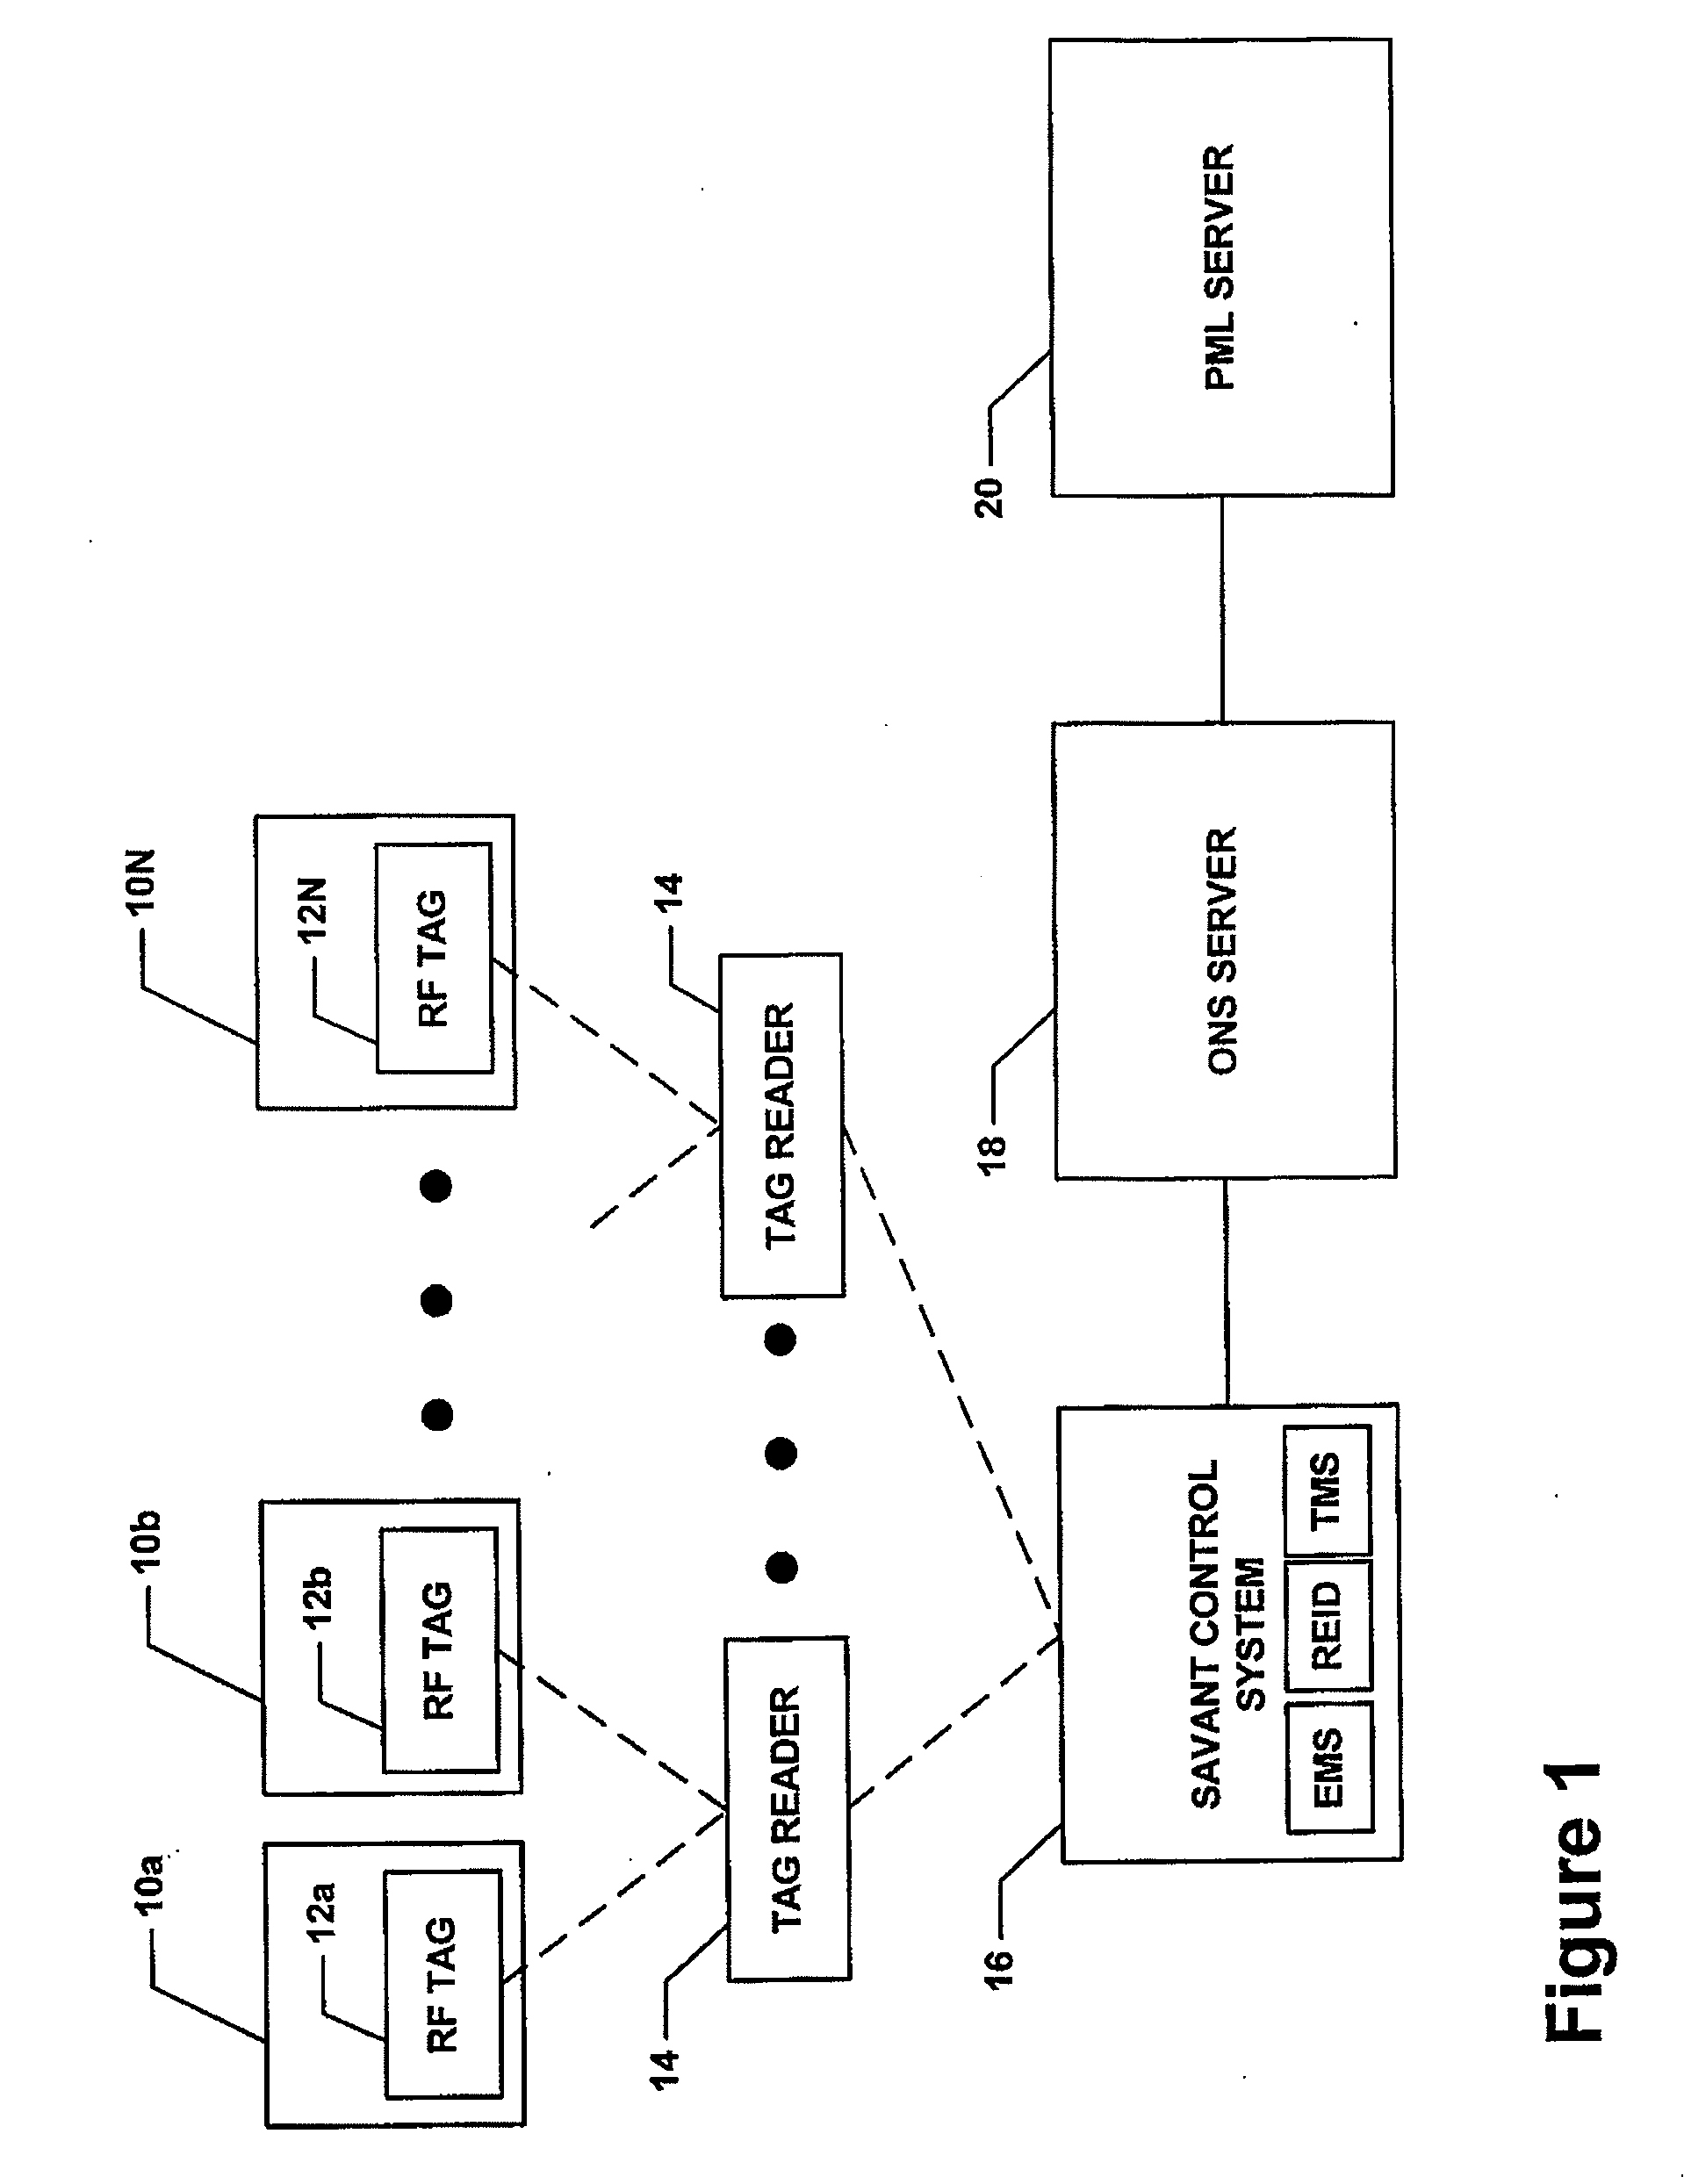 Method and apparatus for routing data in an automatic identification system